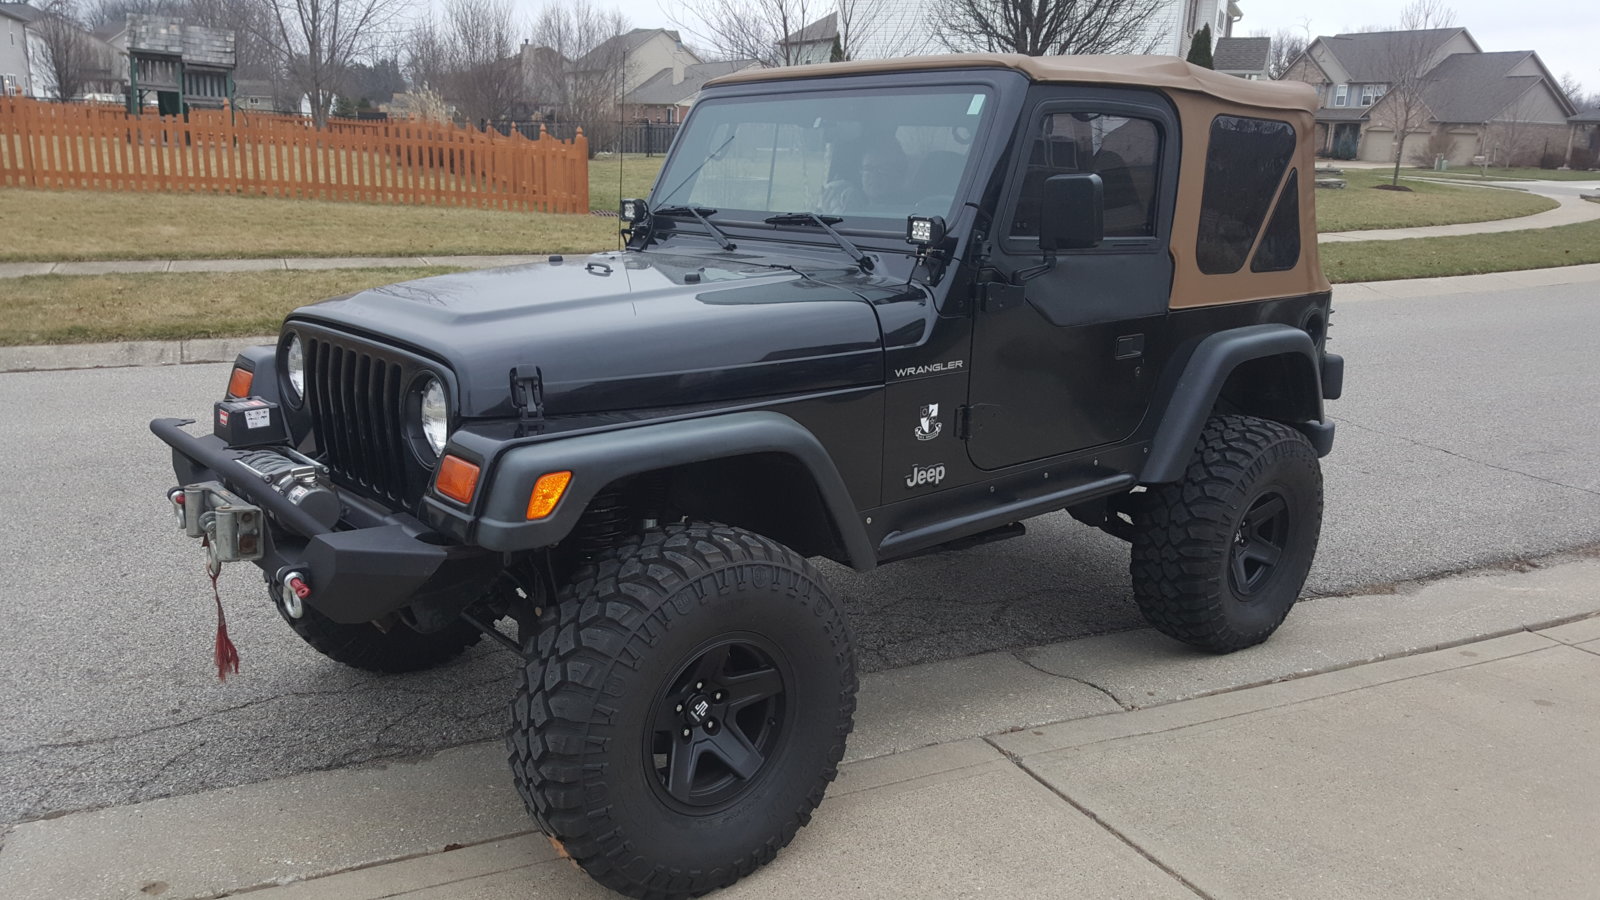 Opinions on these Mammoth wheels? Jeep Wrangler TJ Forum